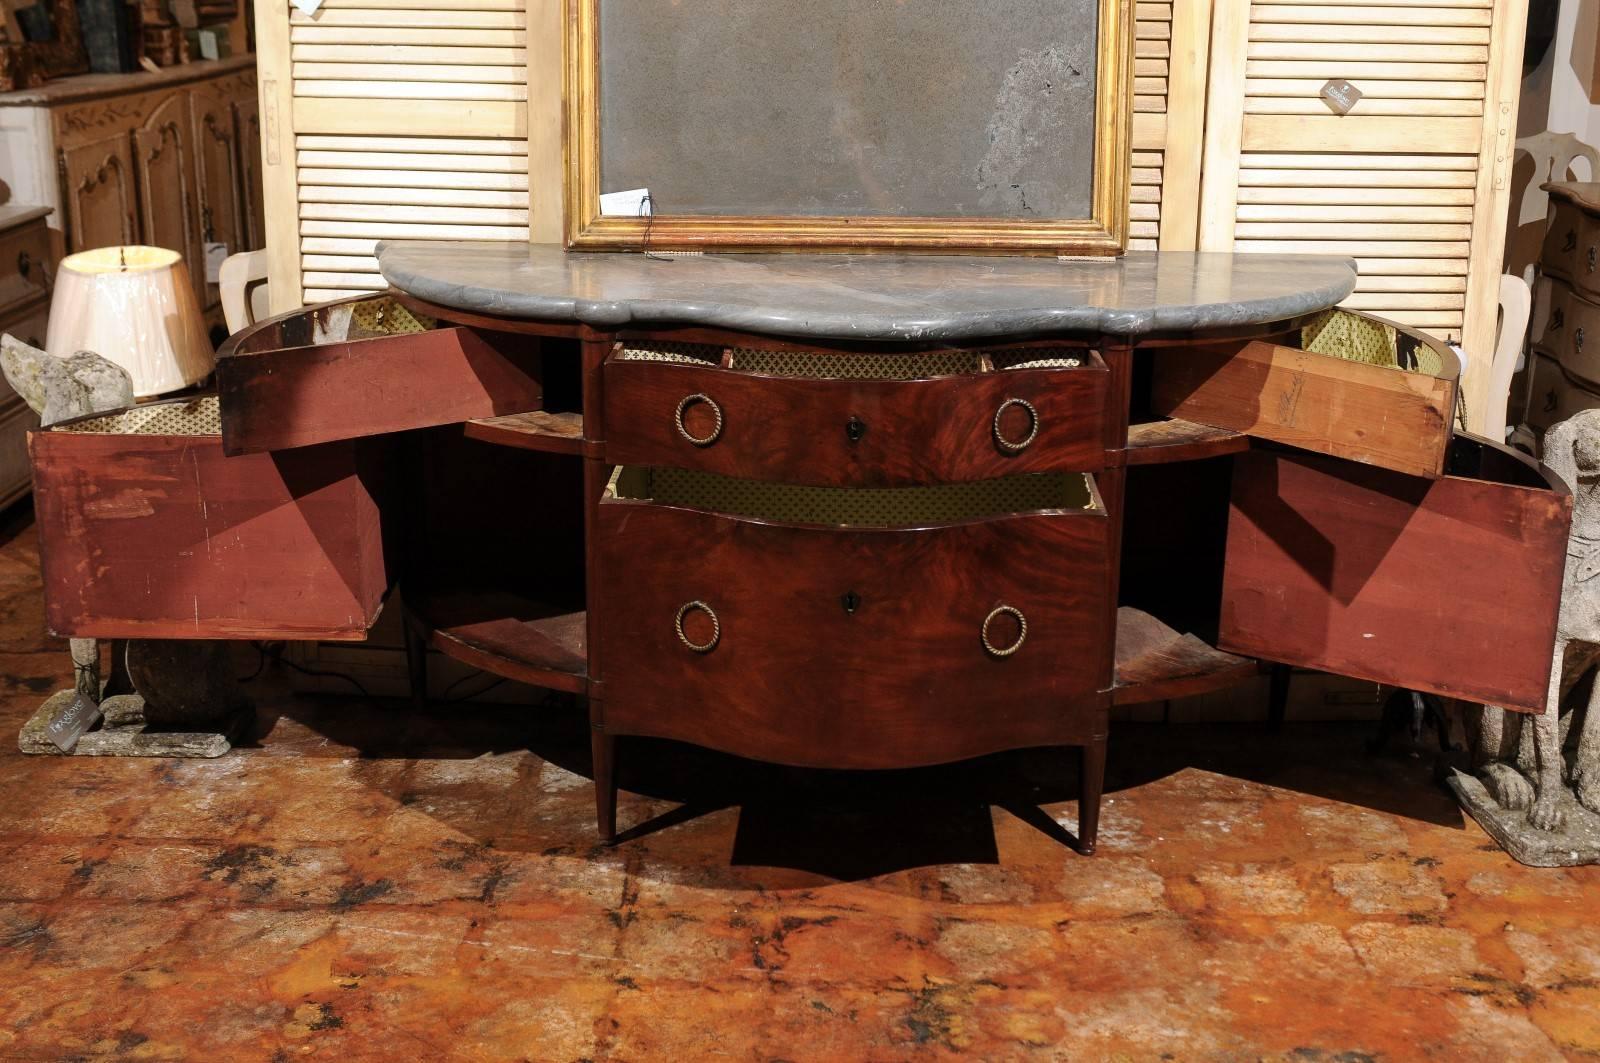 19th Century Italian Flaming Mahogany Buffet with Rounded Corners and Fold out Drawers, 1850s